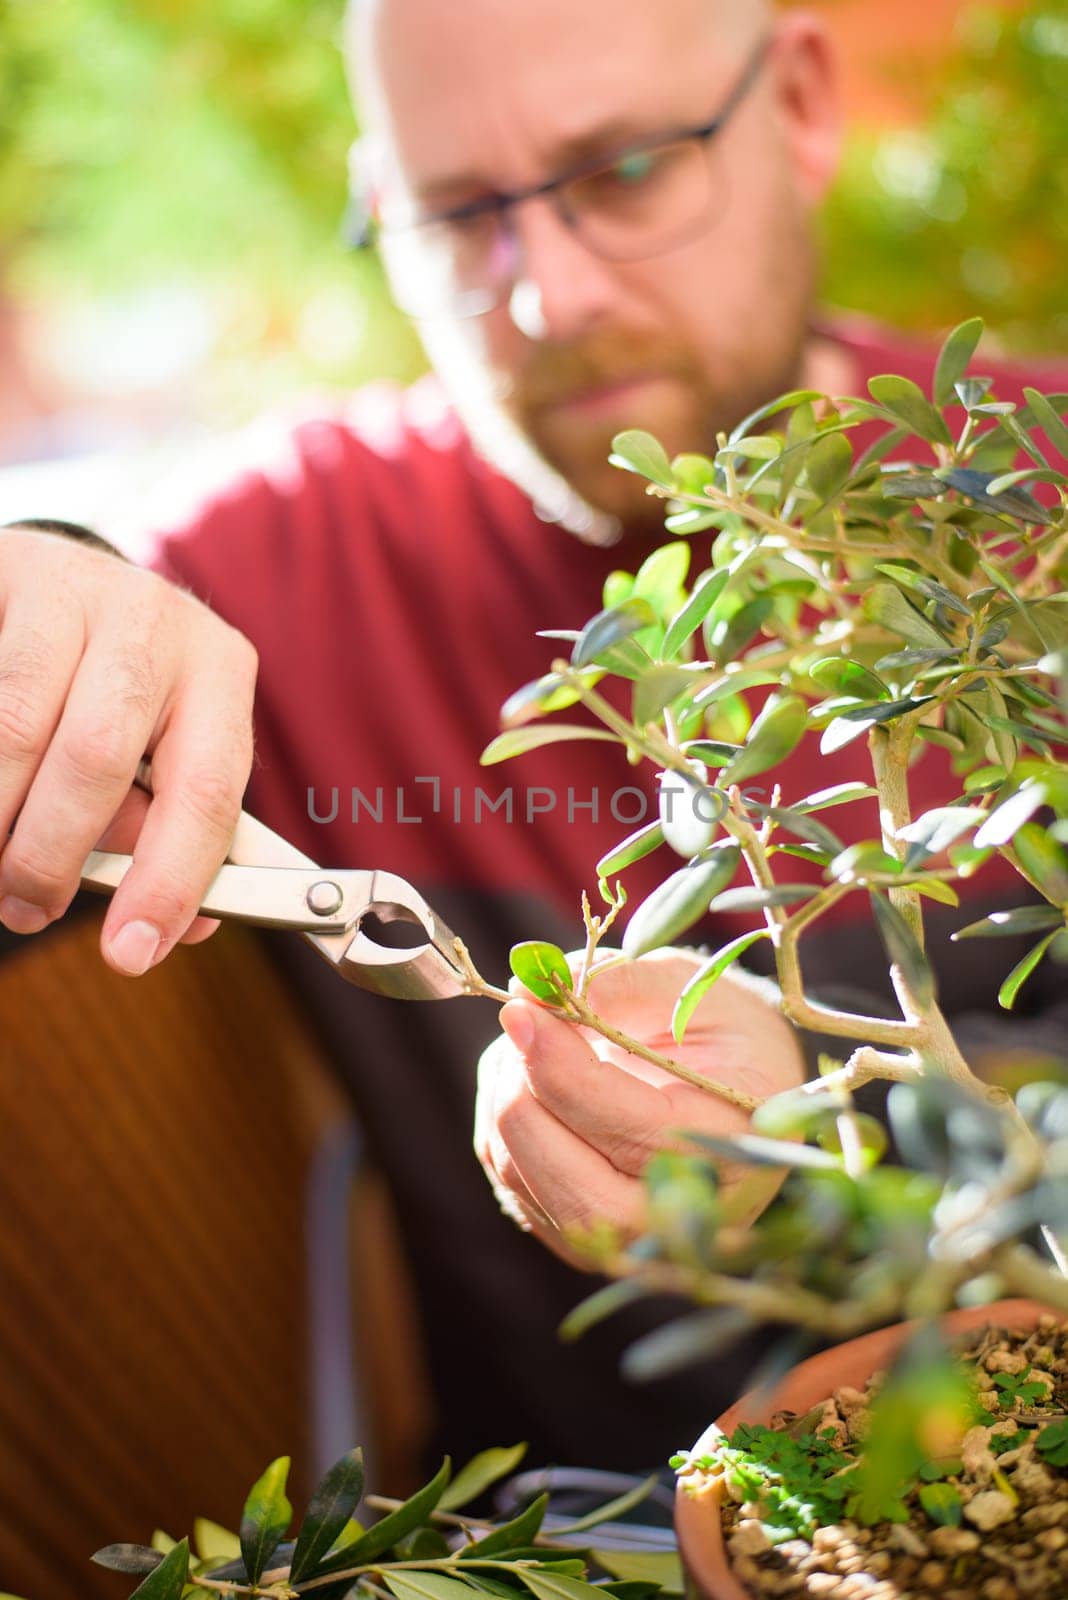 Satisfied senior man trimming small plant at home. Proud old gardener man pruning bonsai as a hobby. Happy smiling retired man pruning a shrub at home with satisfaction.